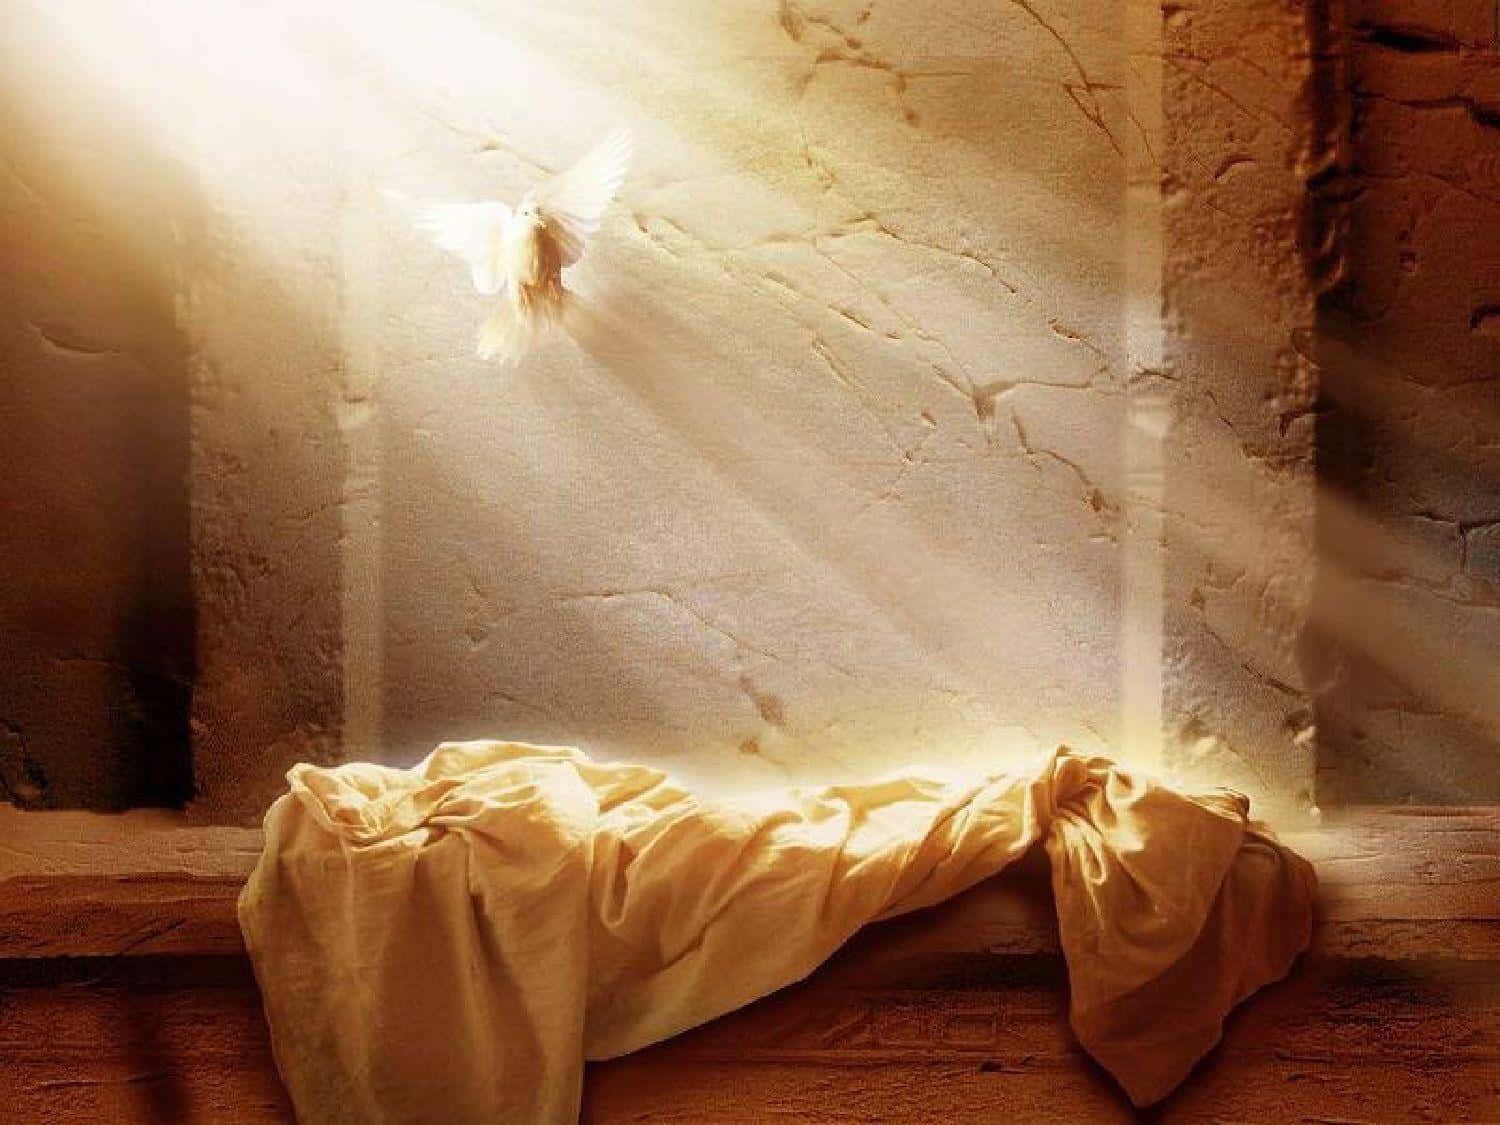 The power of the empty tomb. Wallpaper